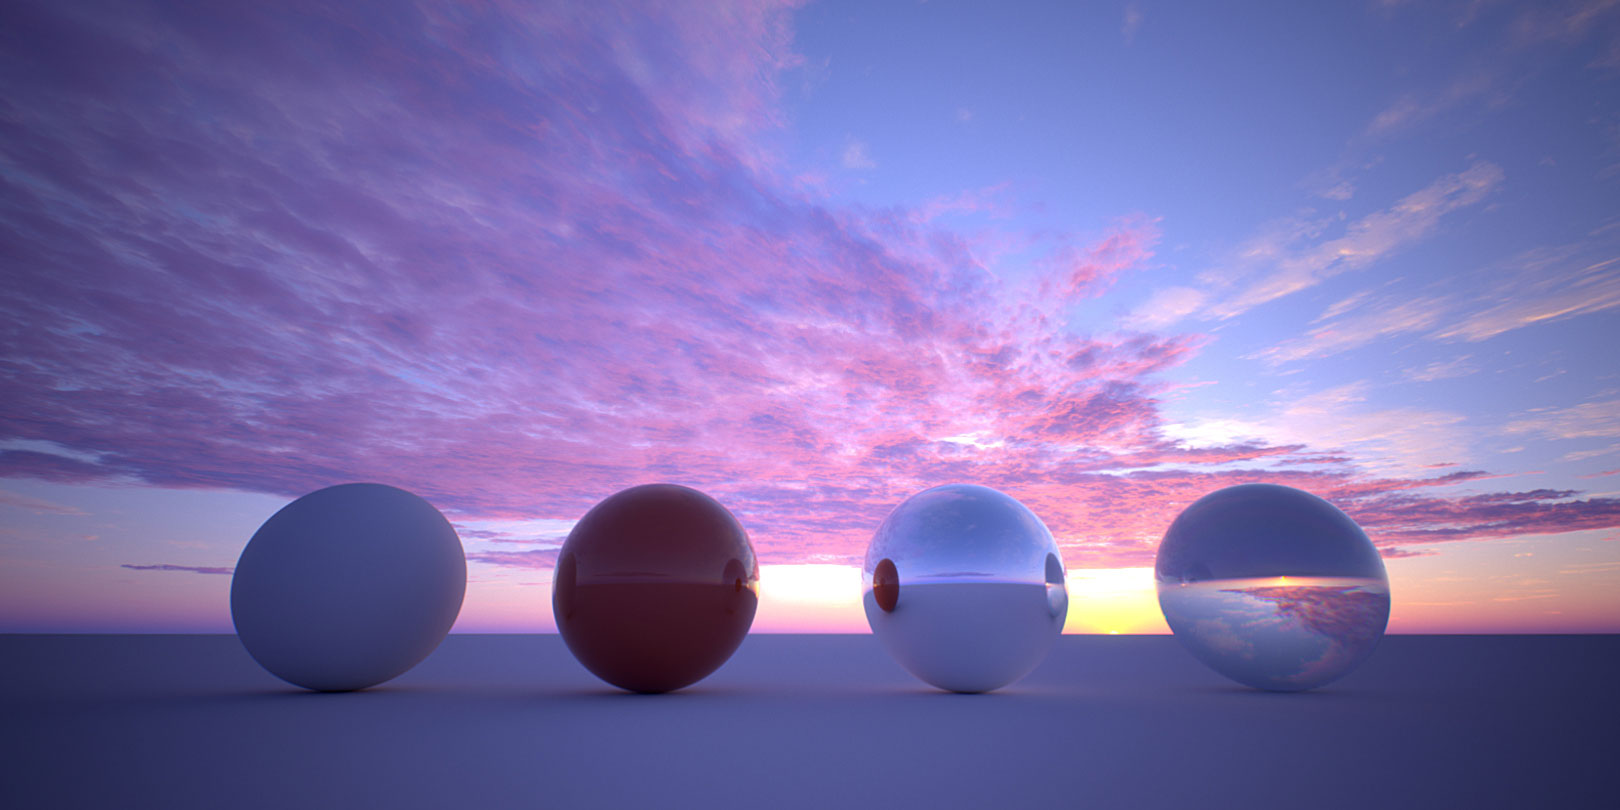 CG HDRI / Epic Sunsets from helloluxx by Shawn Astrom